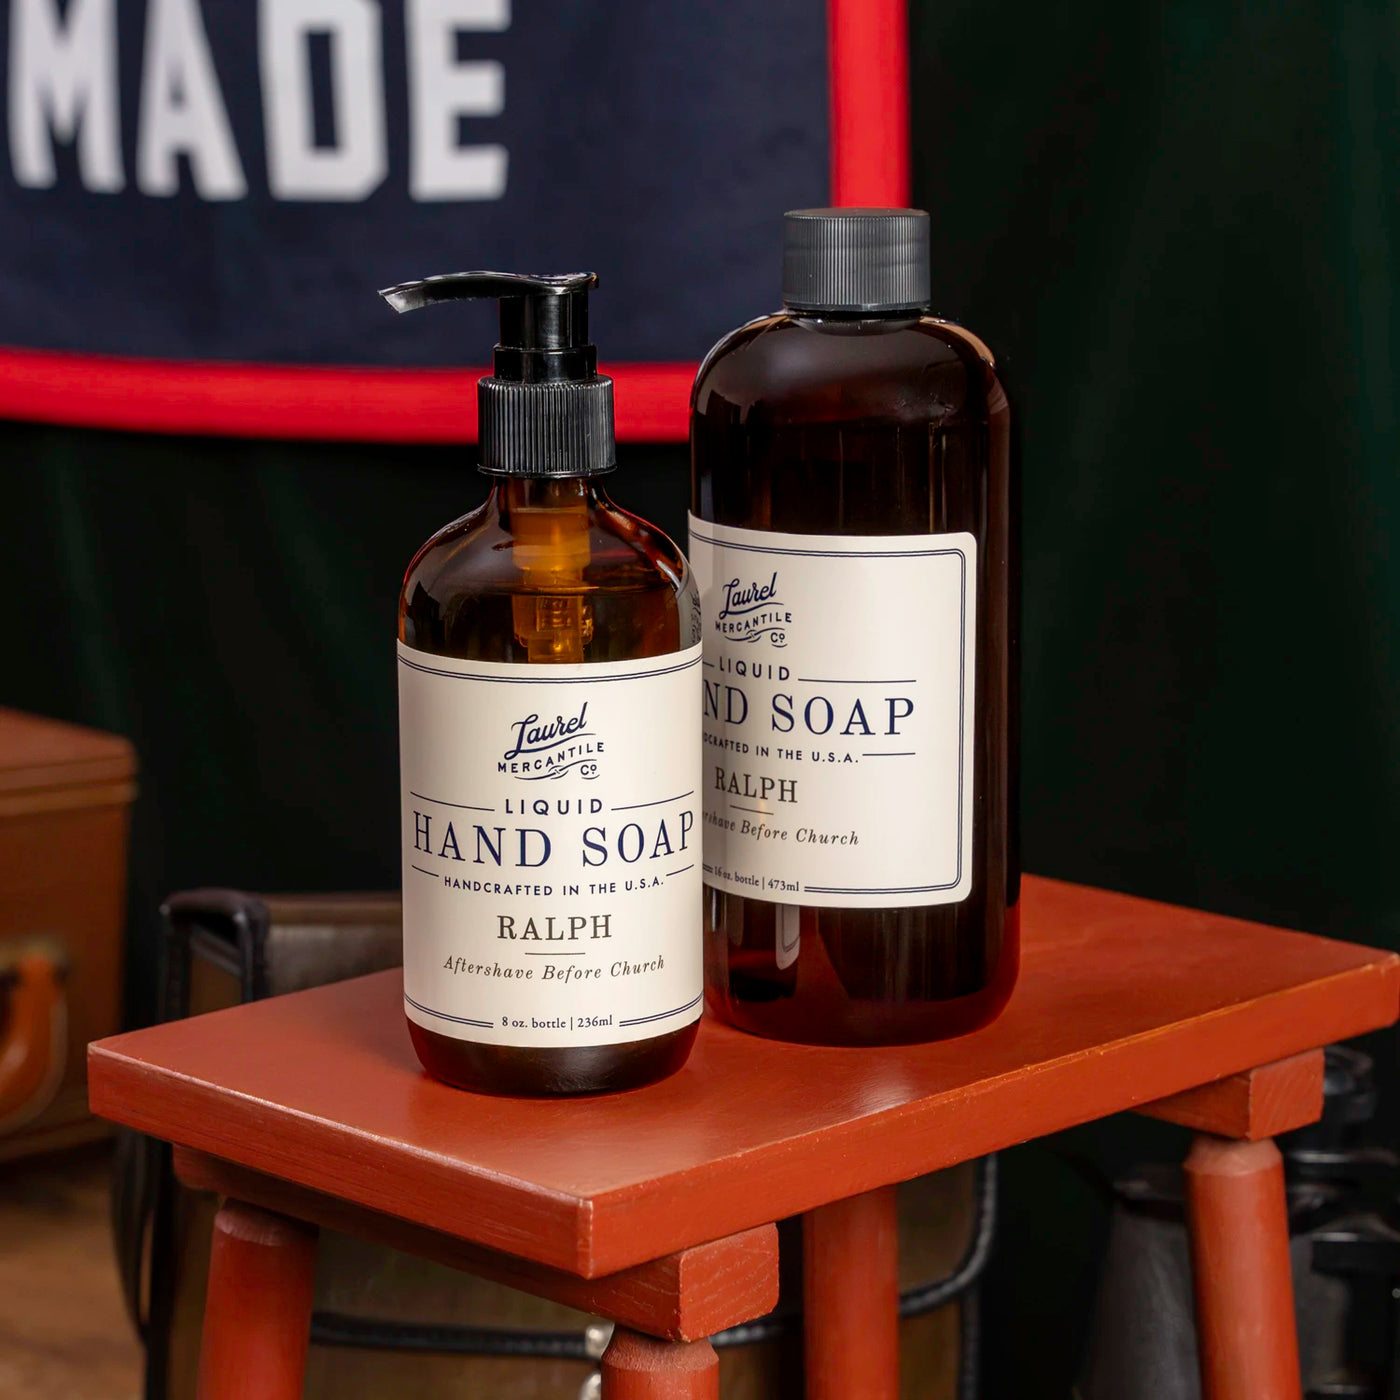 Ralph hand soap and refill